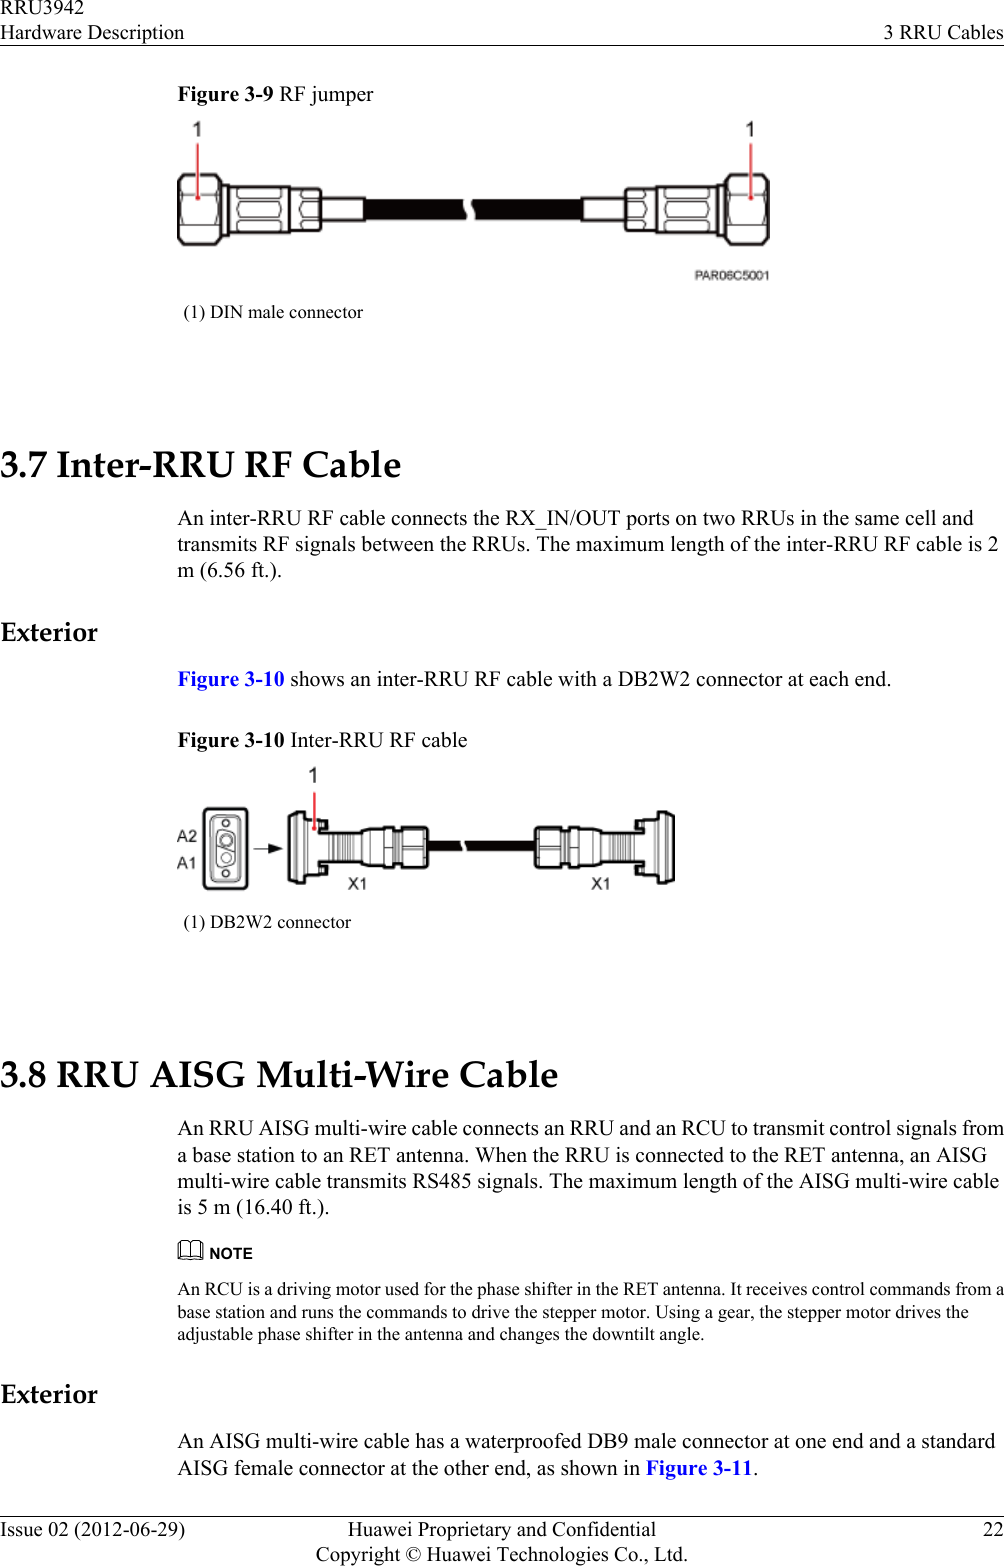 Figure 3-9 RF jumper(1) DIN male connector 3.7 Inter-RRU RF CableAn inter-RRU RF cable connects the RX_IN/OUT ports on two RRUs in the same cell andtransmits RF signals between the RRUs. The maximum length of the inter-RRU RF cable is 2m (6.56 ft.).ExteriorFigure 3-10 shows an inter-RRU RF cable with a DB2W2 connector at each end.Figure 3-10 Inter-RRU RF cable(1) DB2W2 connector 3.8 RRU AISG Multi-Wire CableAn RRU AISG multi-wire cable connects an RRU and an RCU to transmit control signals froma base station to an RET antenna. When the RRU is connected to the RET antenna, an AISGmulti-wire cable transmits RS485 signals. The maximum length of the AISG multi-wire cableis 5 m (16.40 ft.).NOTEAn RCU is a driving motor used for the phase shifter in the RET antenna. It receives control commands from abase station and runs the commands to drive the stepper motor. Using a gear, the stepper motor drives theadjustable phase shifter in the antenna and changes the downtilt angle.ExteriorAn AISG multi-wire cable has a waterproofed DB9 male connector at one end and a standardAISG female connector at the other end, as shown in Figure 3-11.RRU3942Hardware Description 3 RRU CablesIssue 02 (2012-06-29) Huawei Proprietary and ConfidentialCopyright © Huawei Technologies Co., Ltd.22